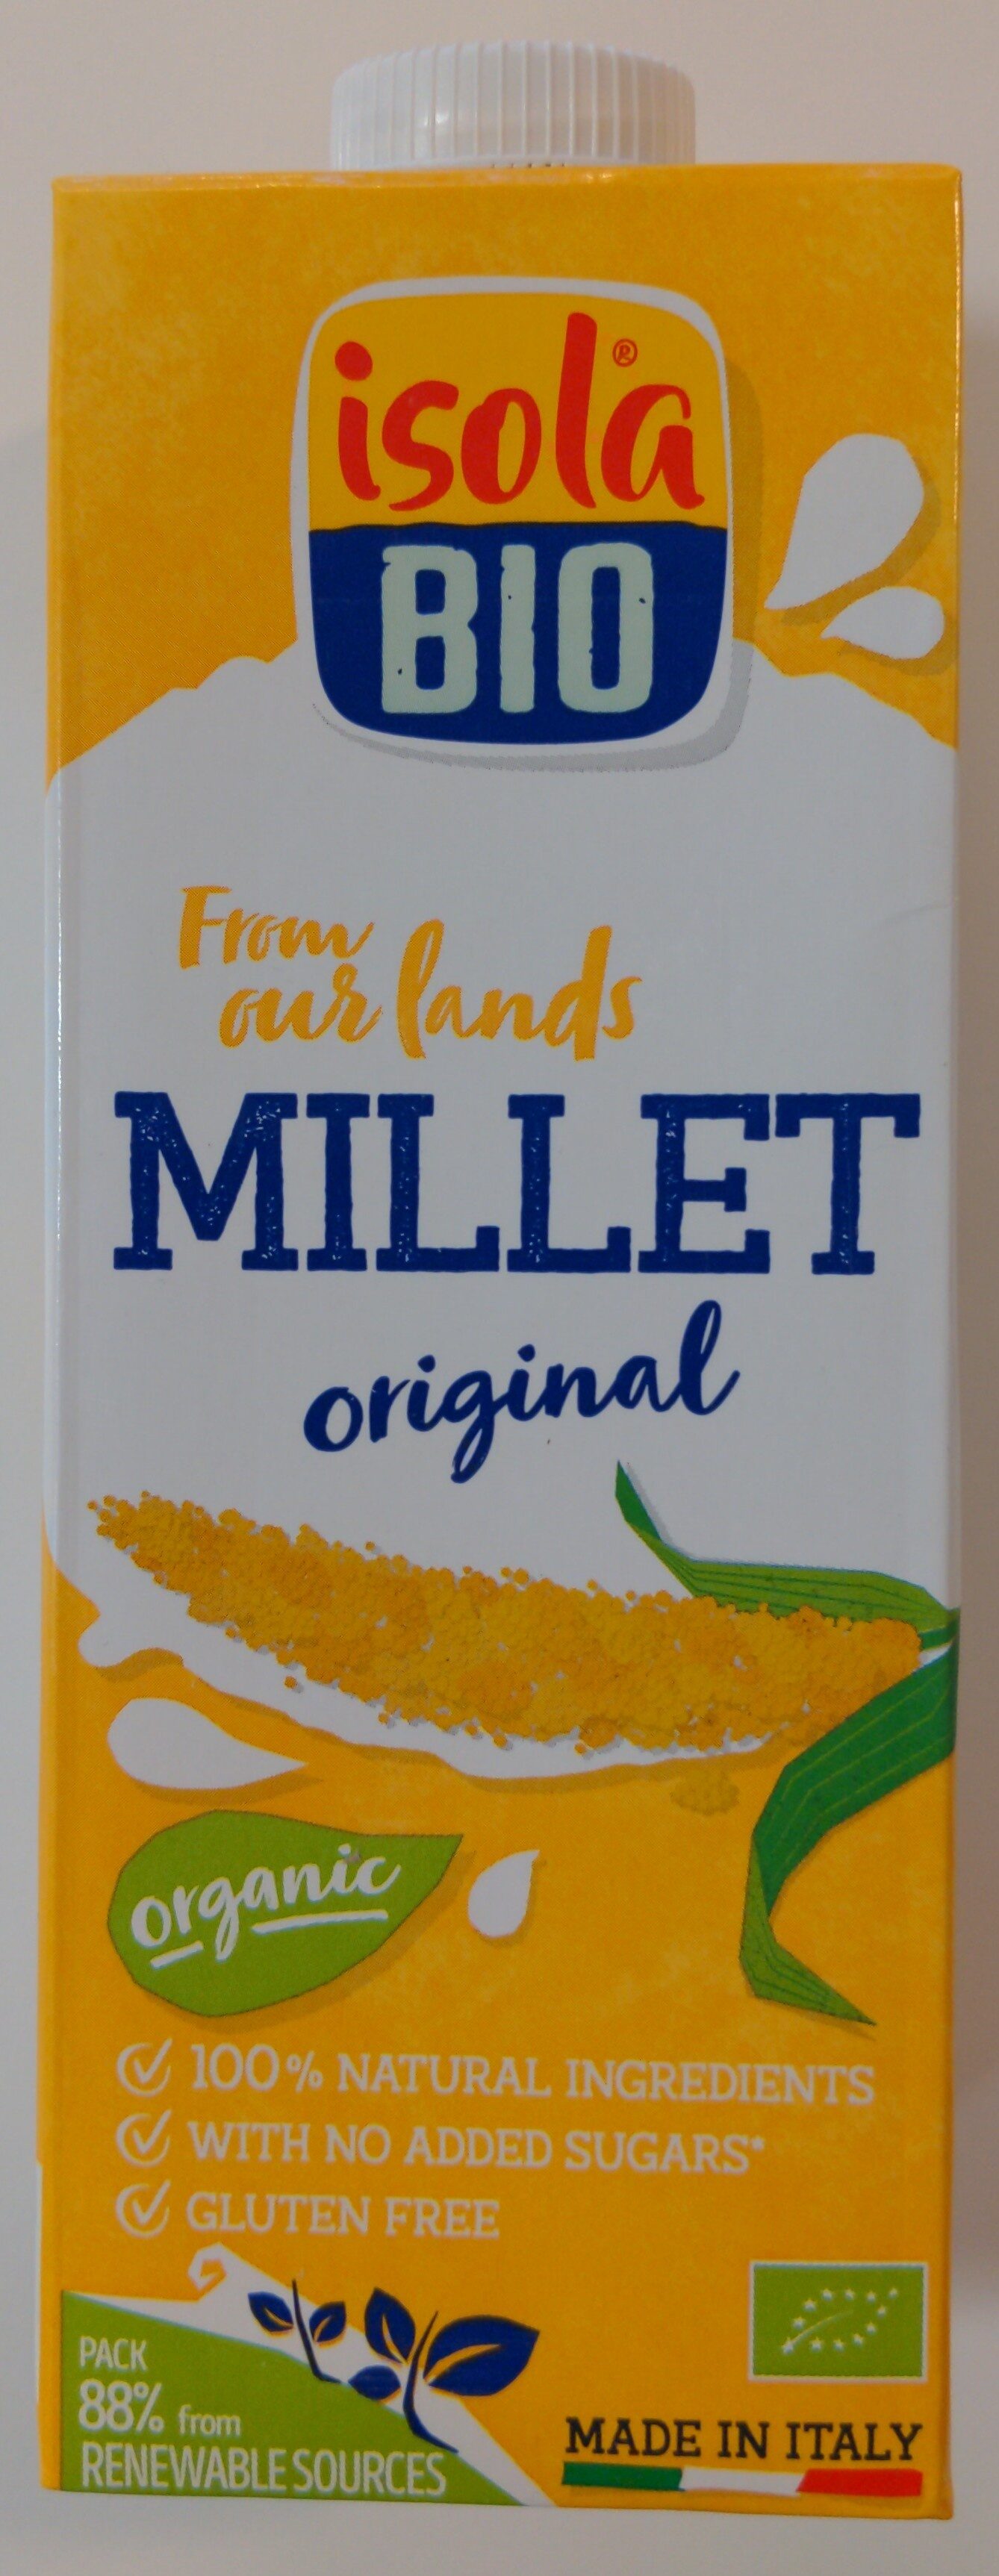 Millet - Tuote